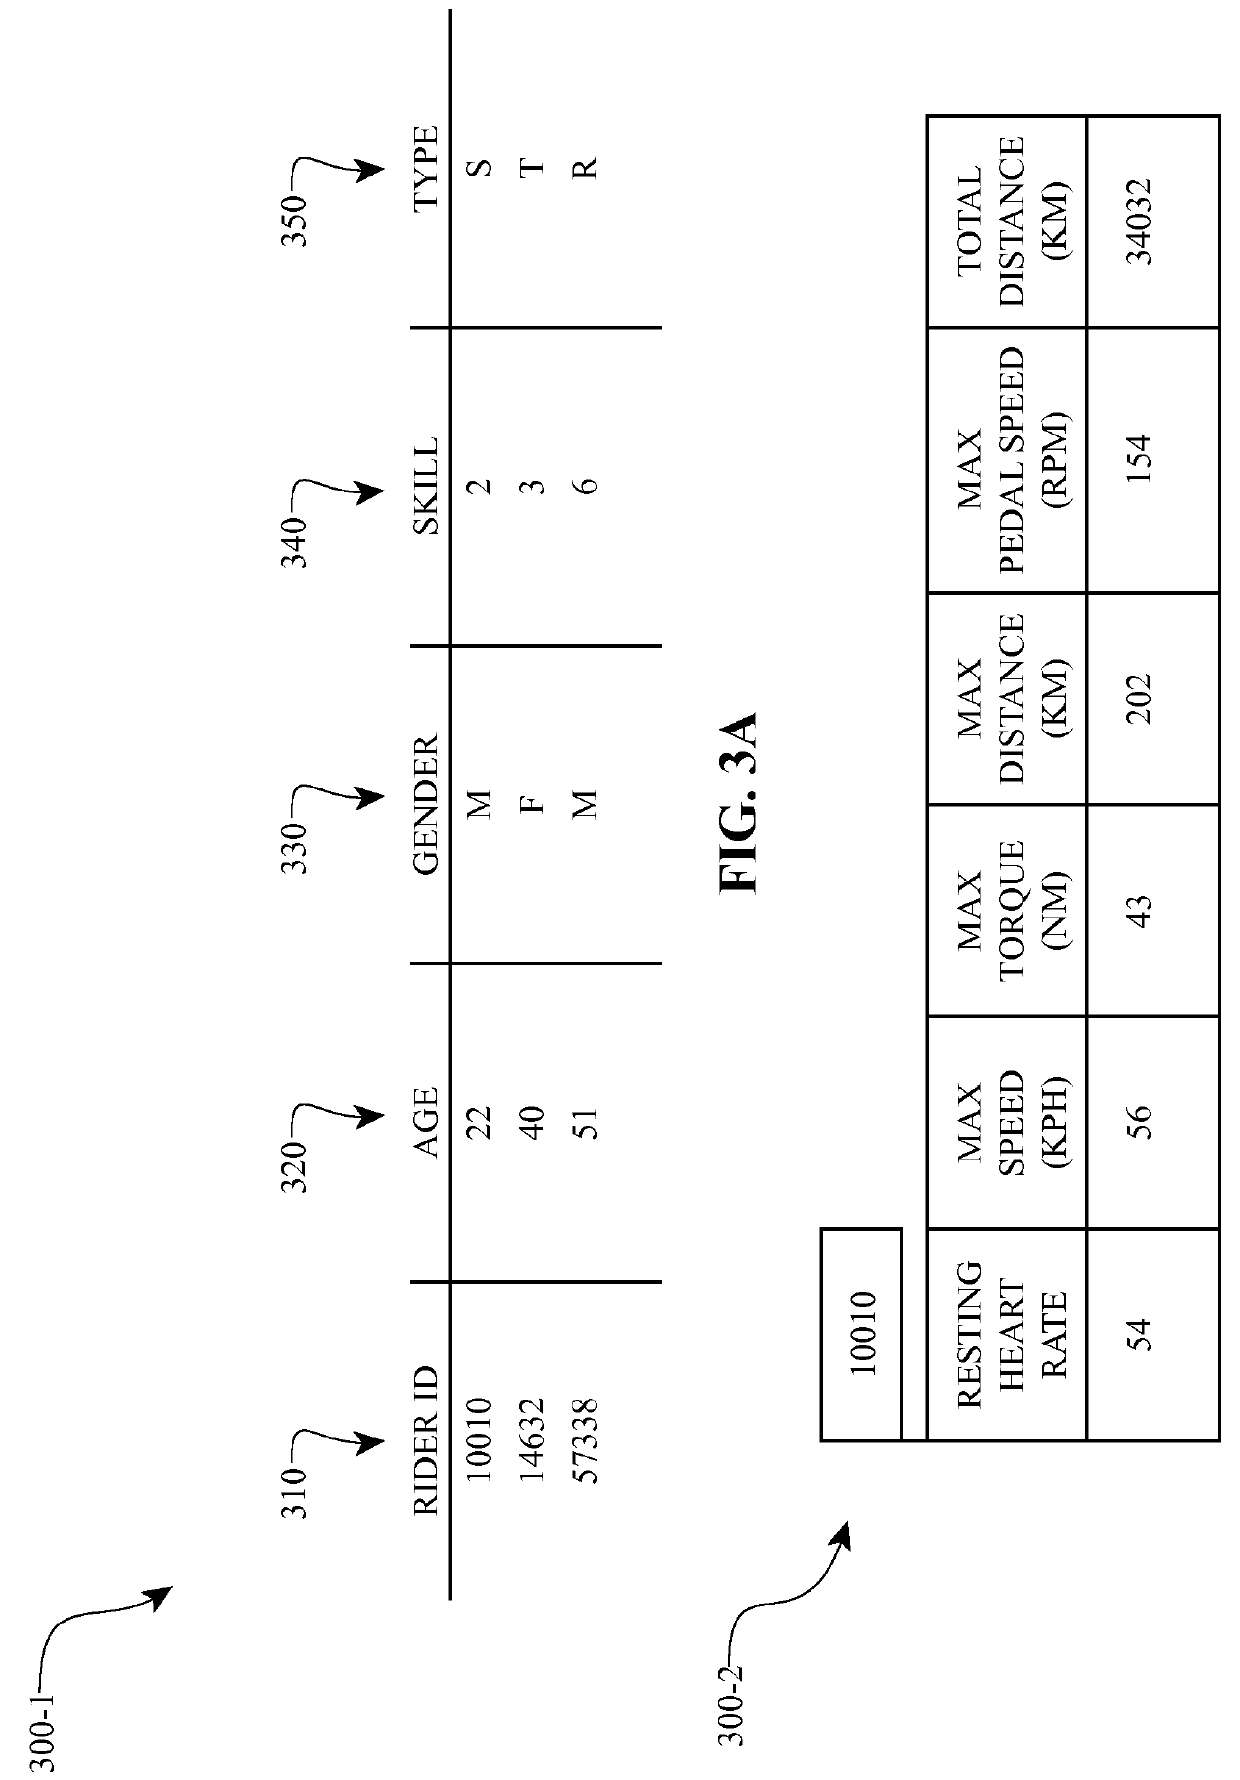 Components, systems and methods of bicycle-based network connectivity and methods for controlling a bicycle having network connectivity